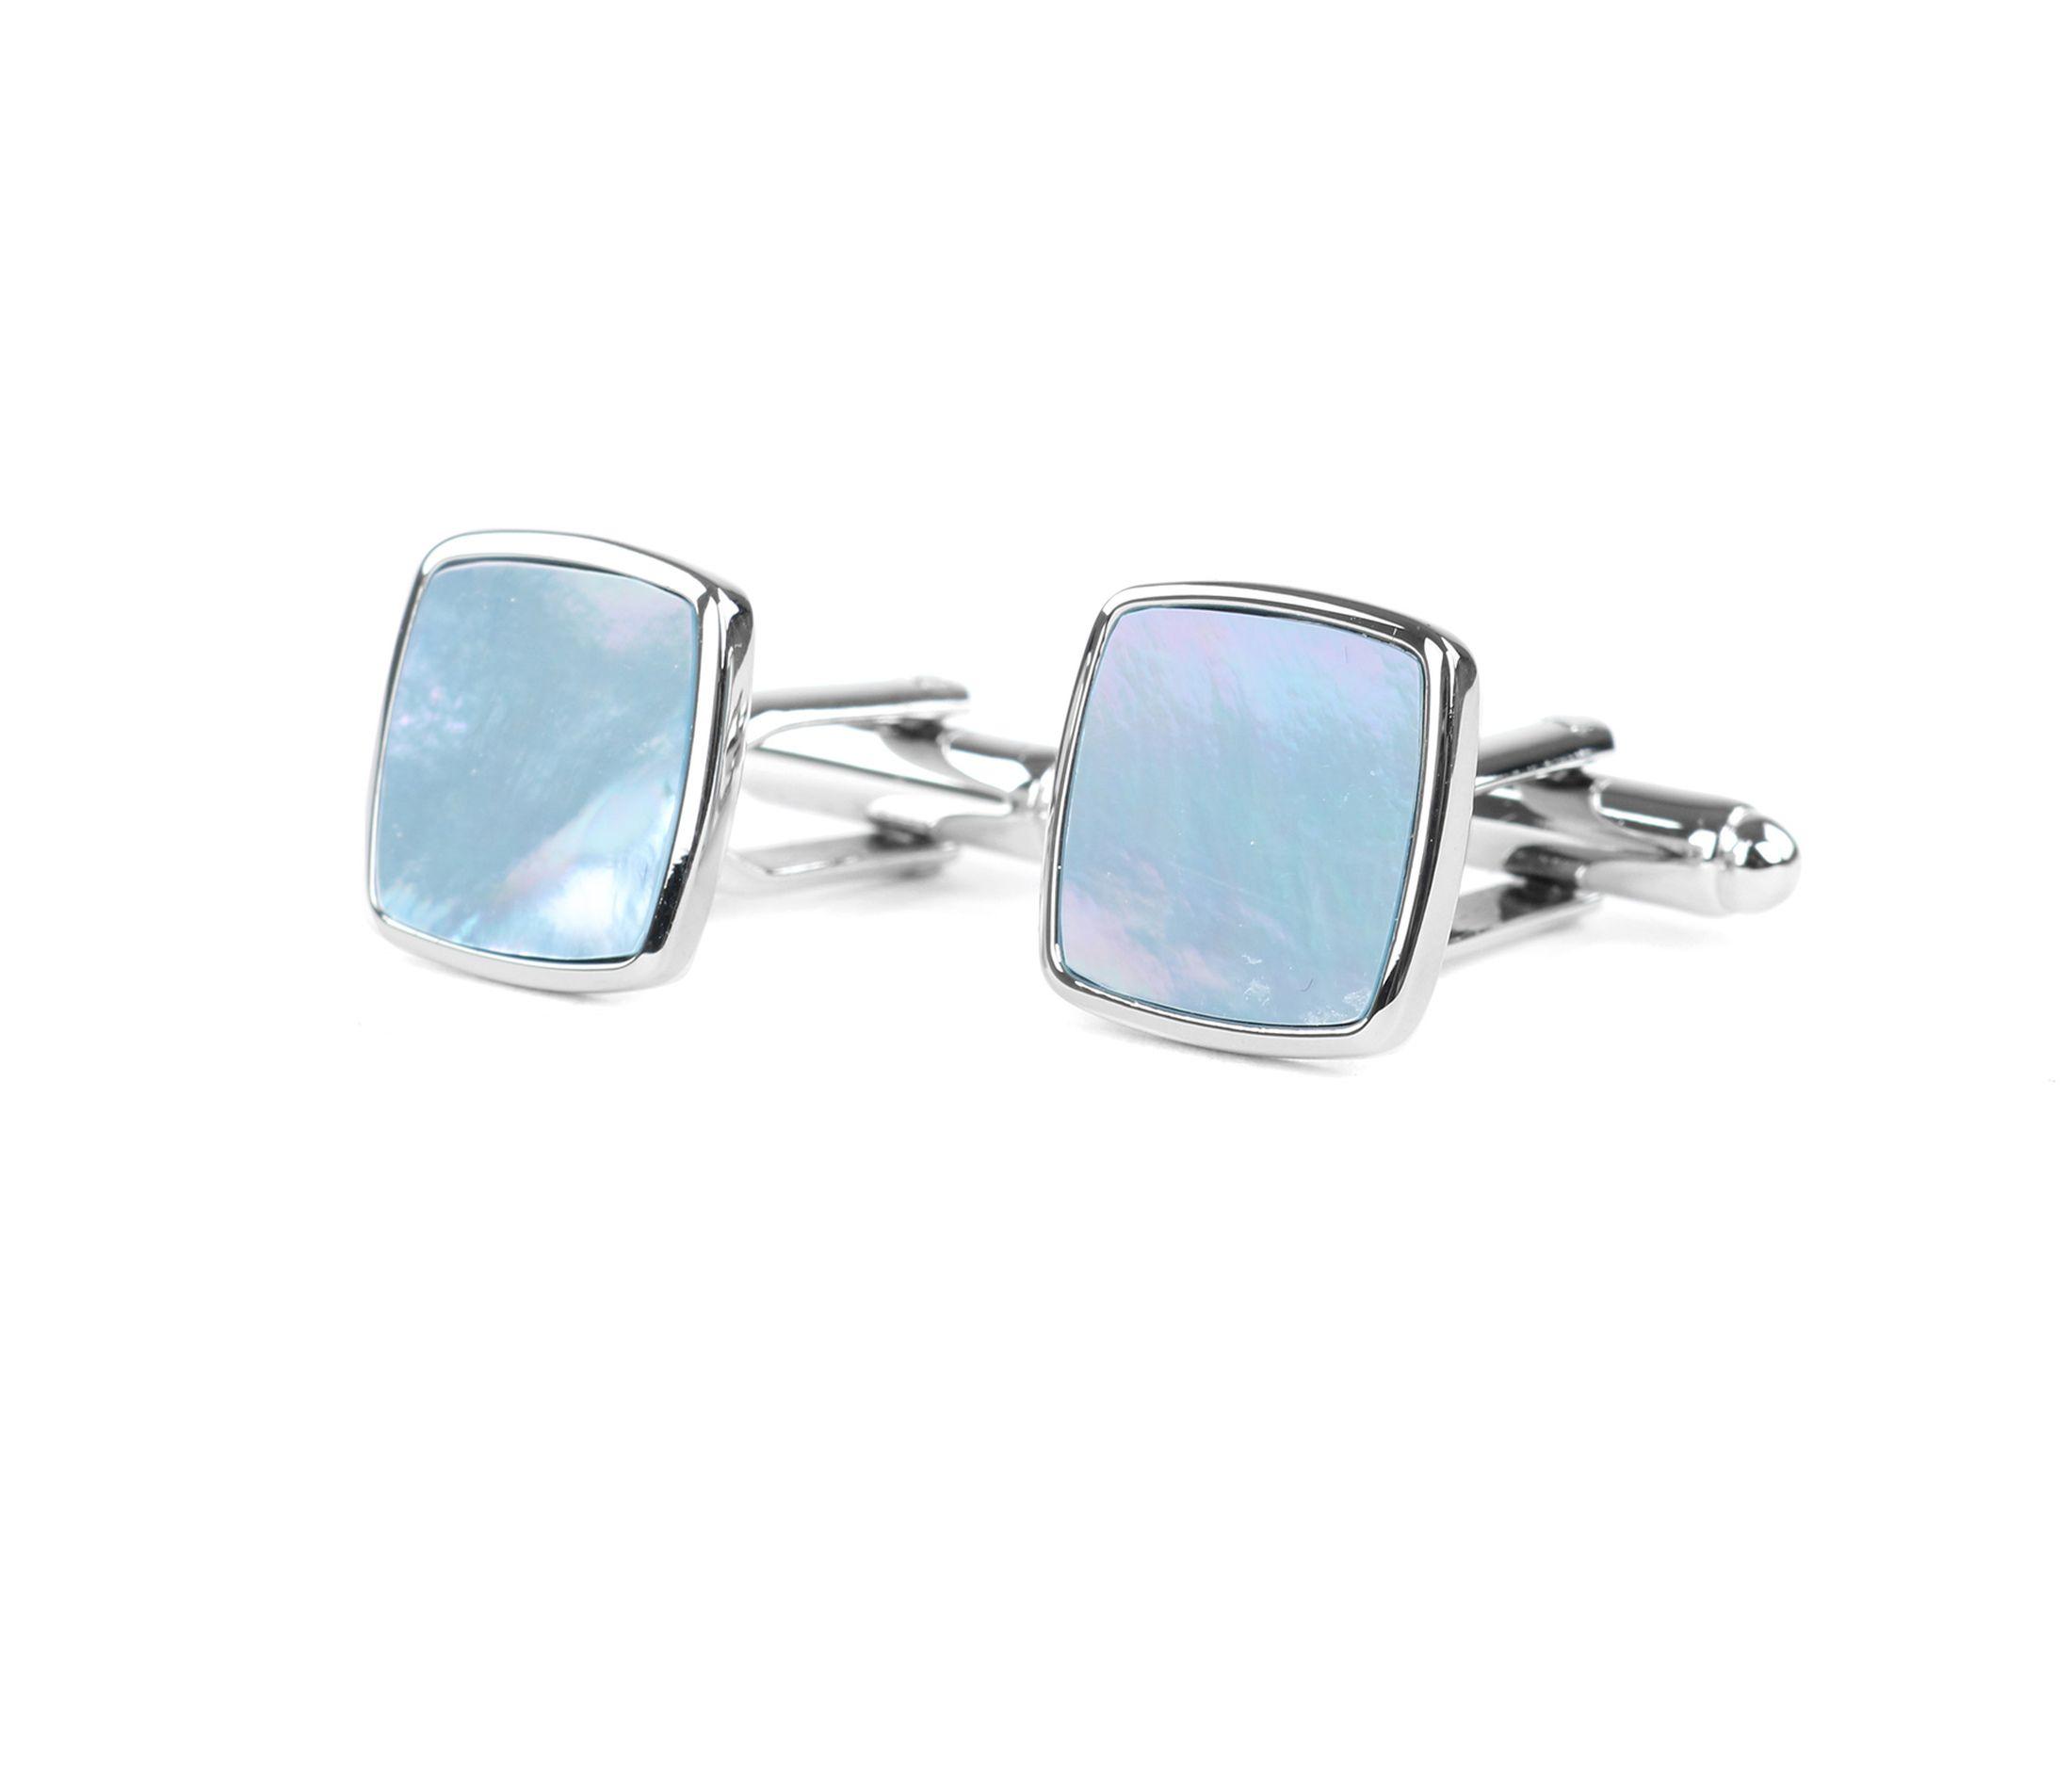 Silver Blue Square Logo - Profuomo Cufflinks Silver Blue square order online | Suitable